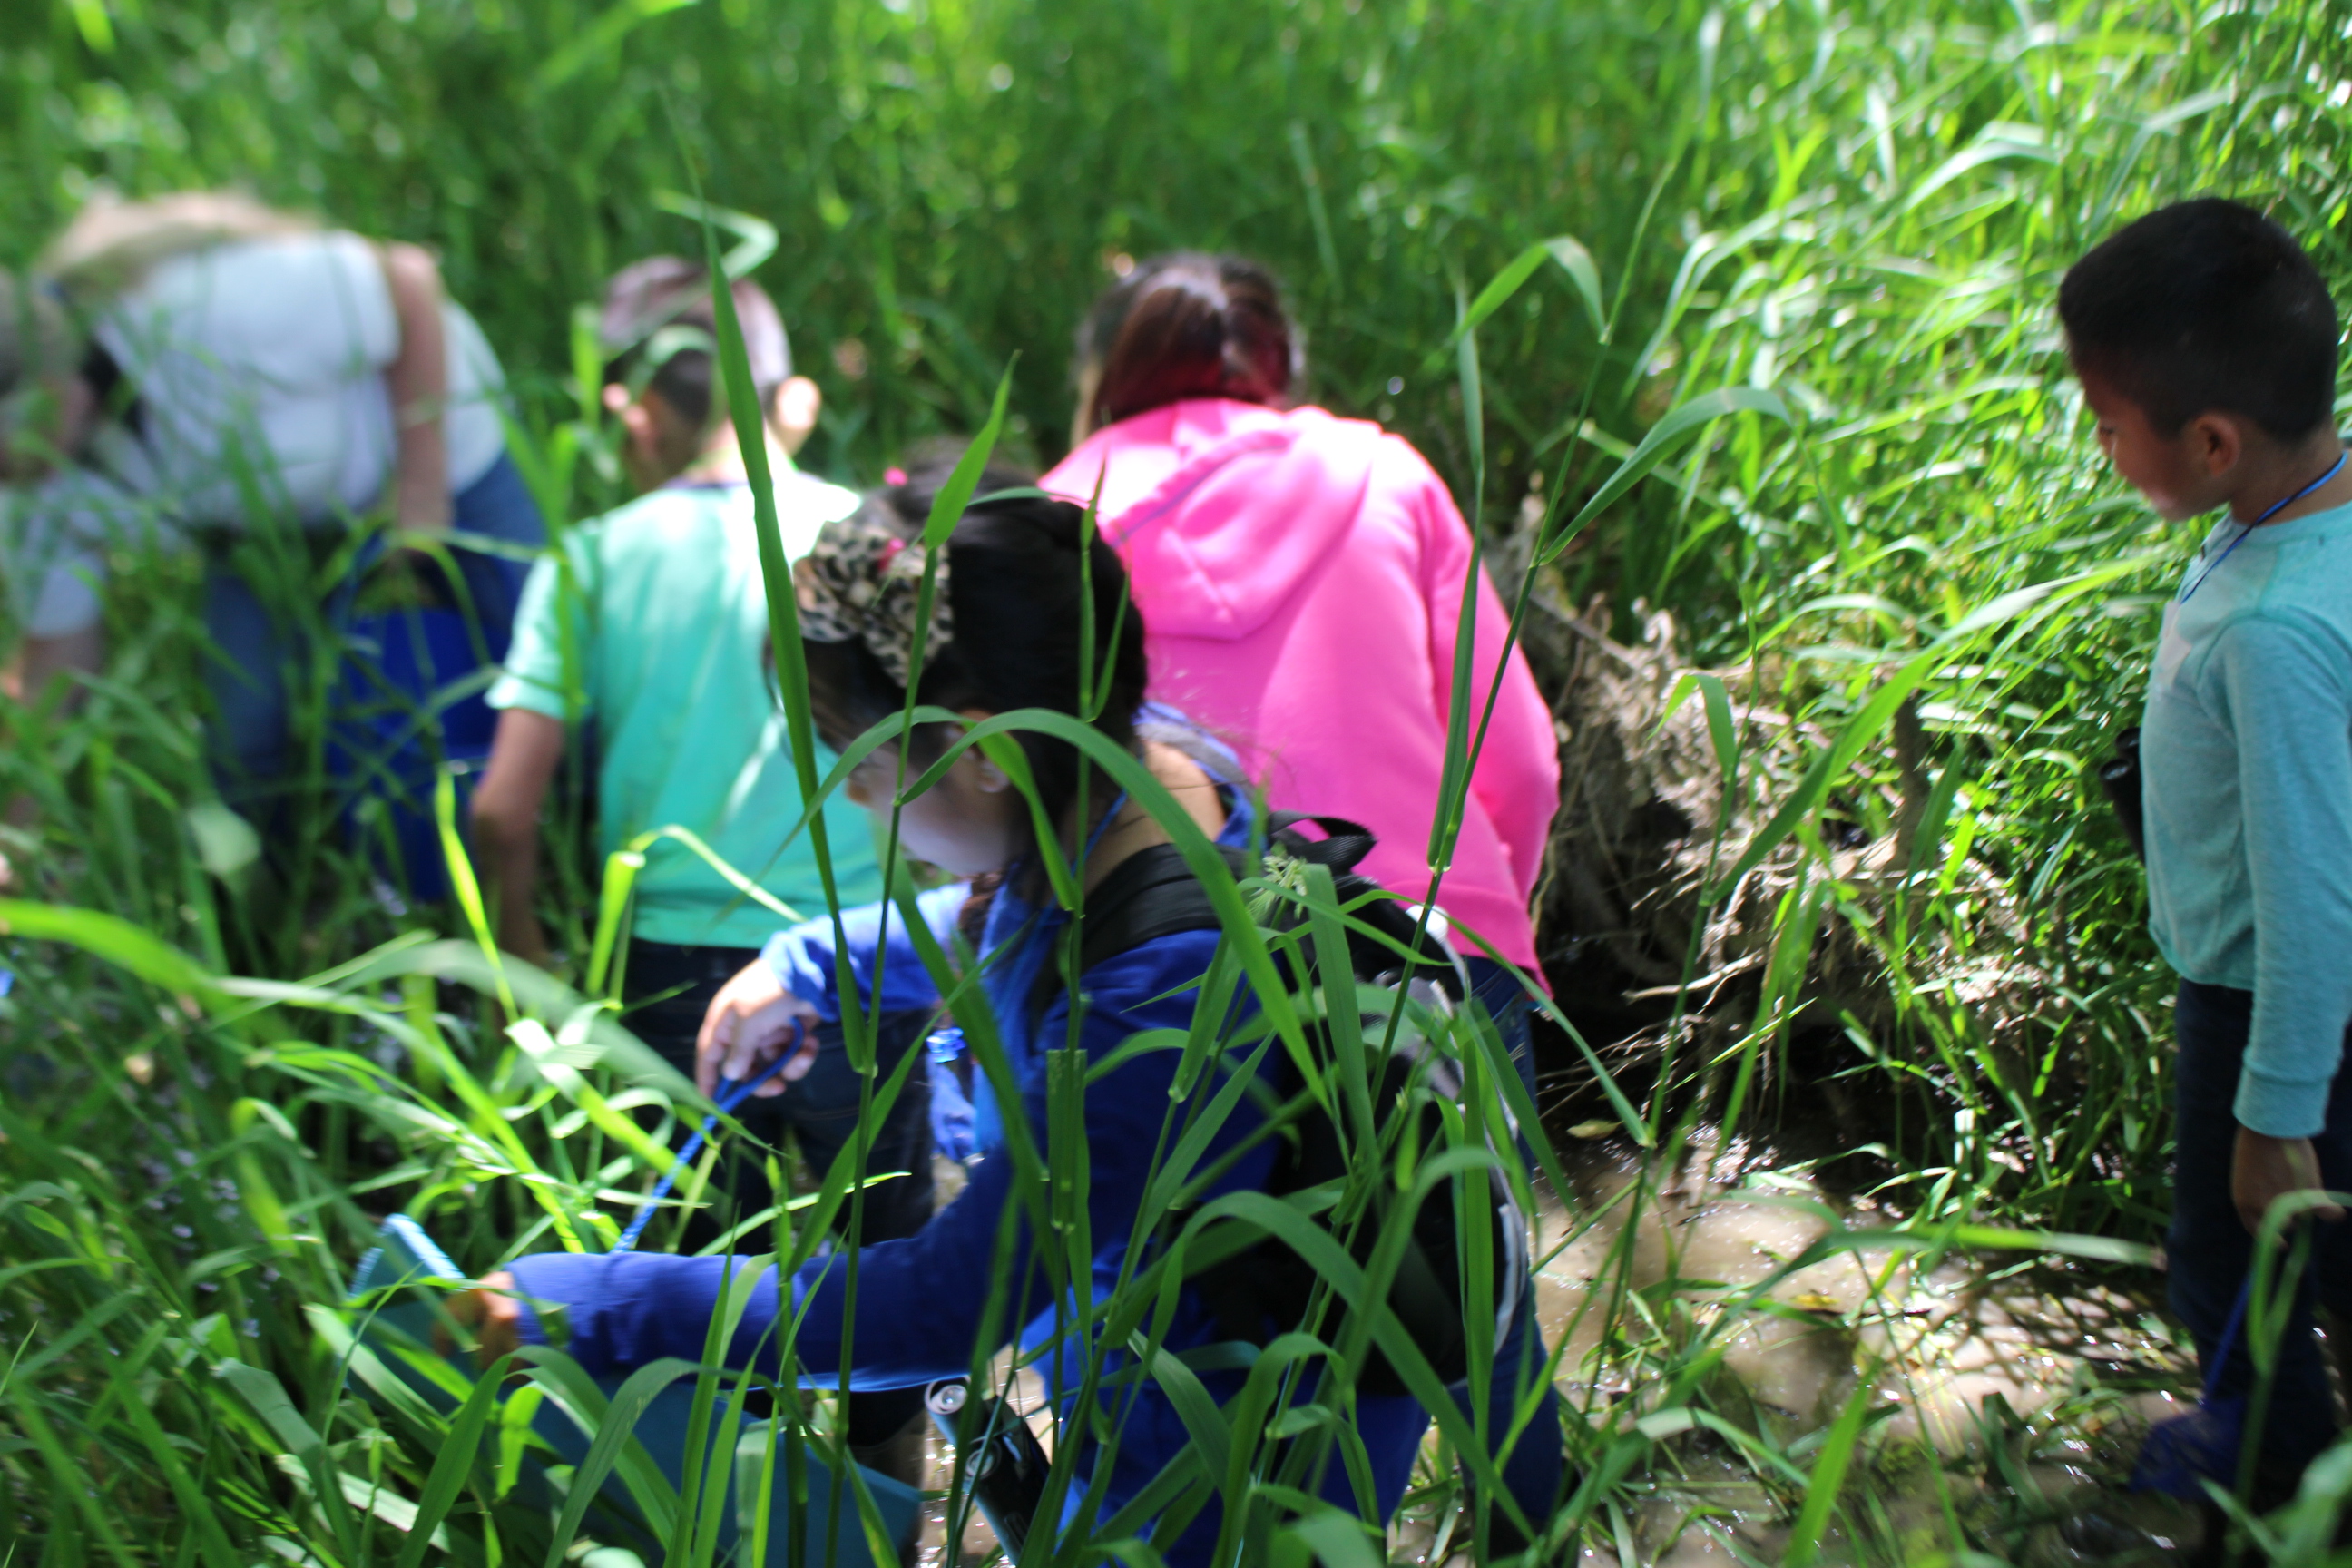 Youth in the Kulshan Creek Neighborhood program search for frogs in the wetlands of Utopia Conservation Area. Photograph credit: NCI staff.